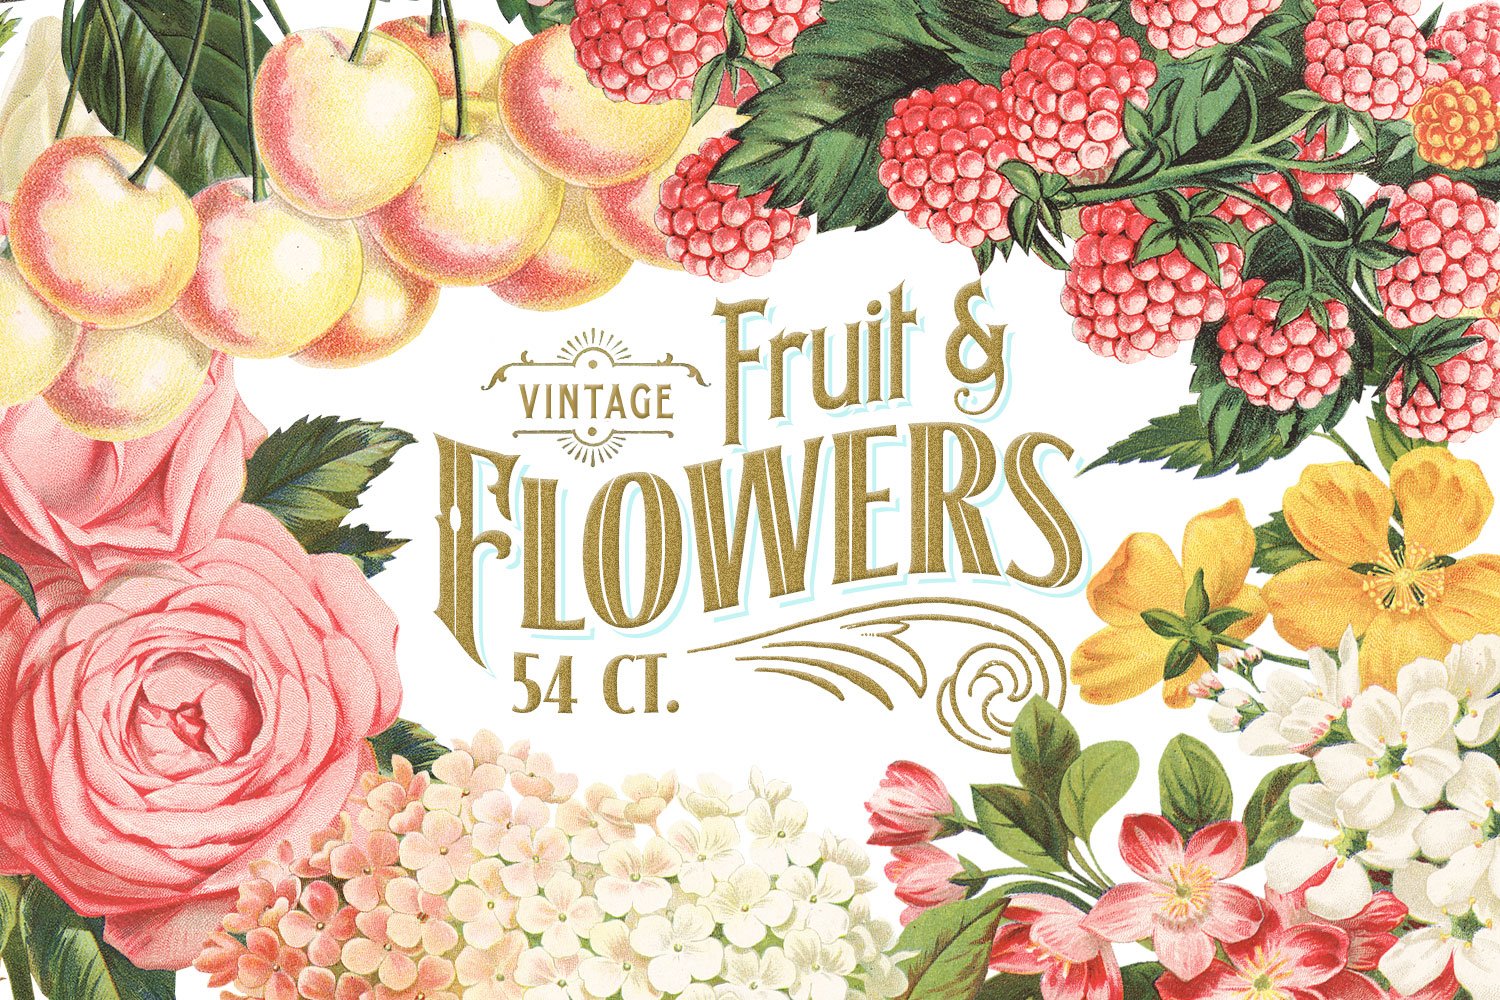 MASSIVE Vintage Fruit and Flowers cover image.